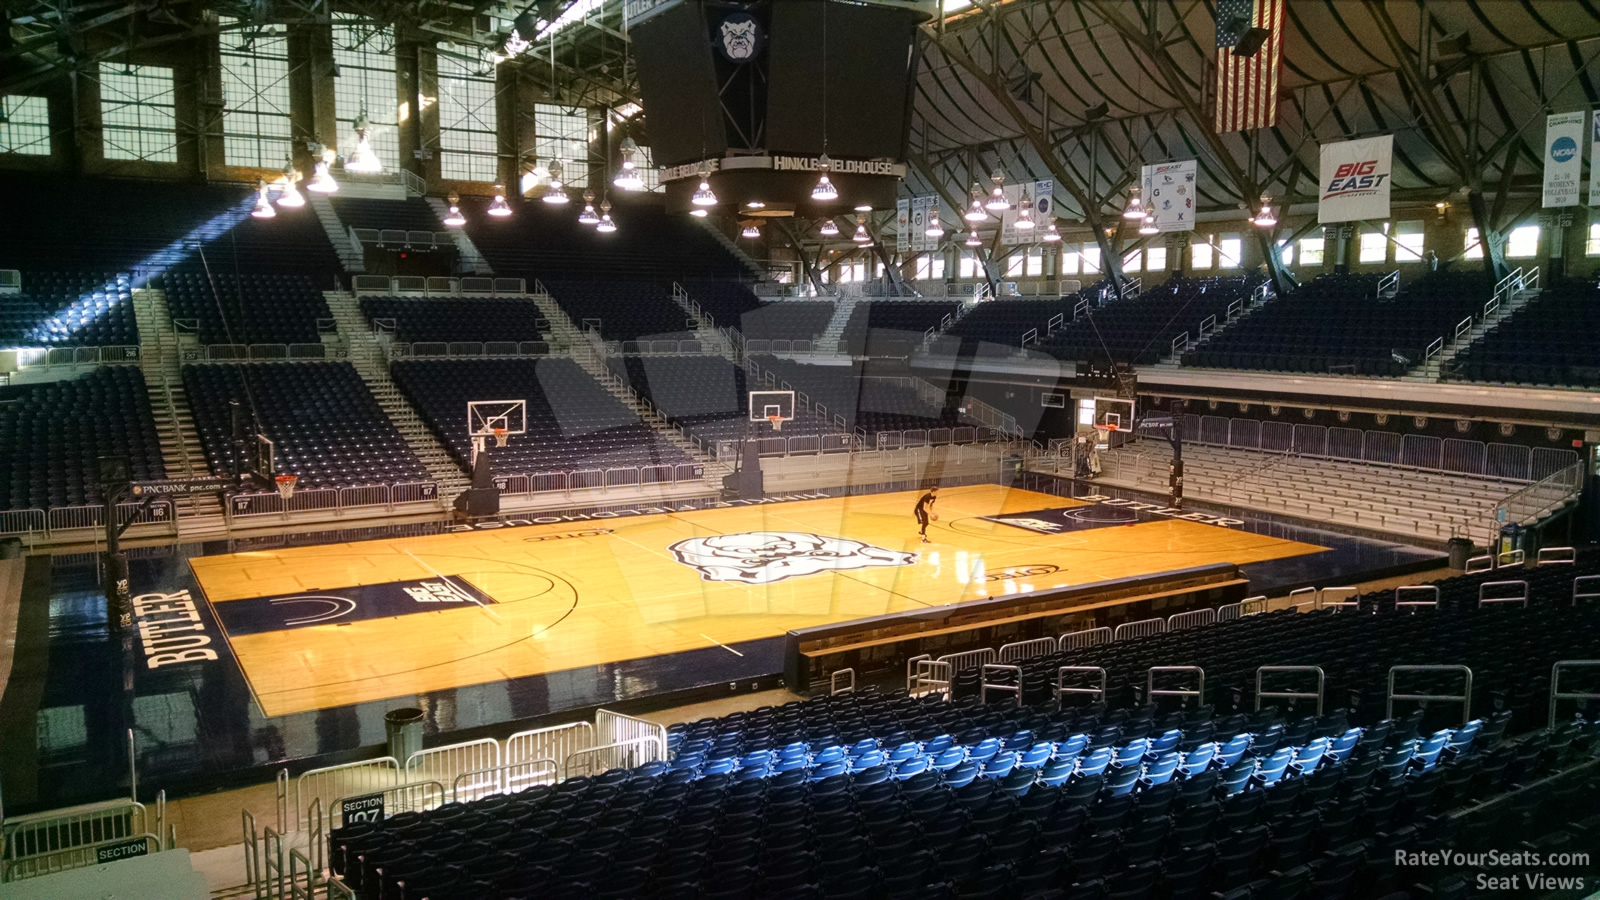 section 208, row 3 seat view  - hinkle fieldhouse